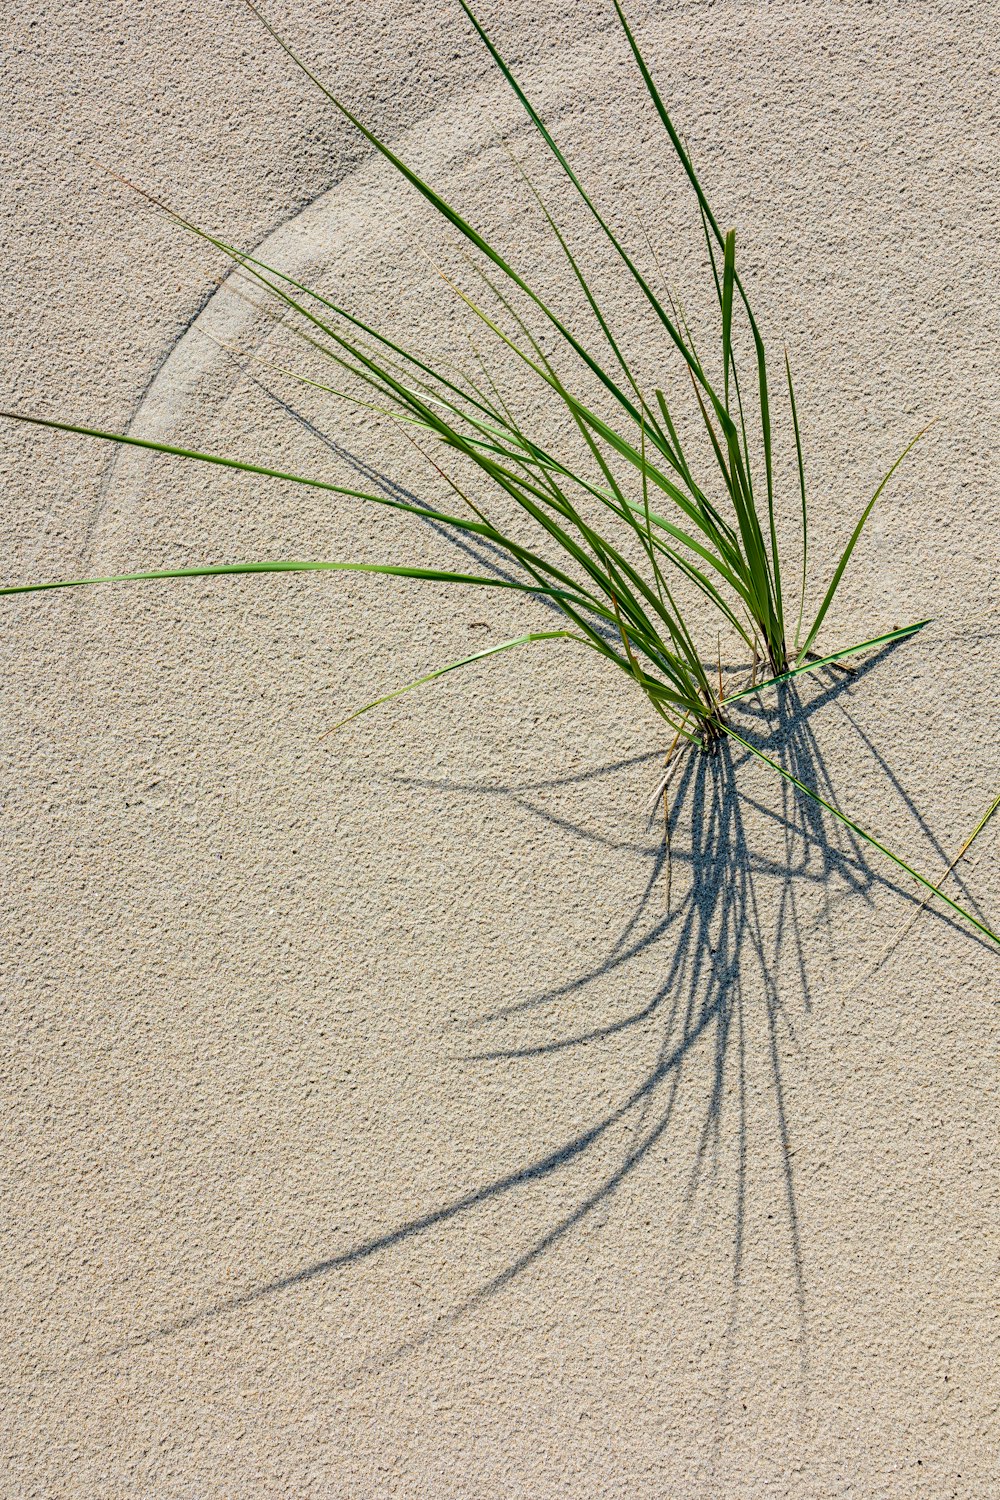 a plant is growing out of the sand